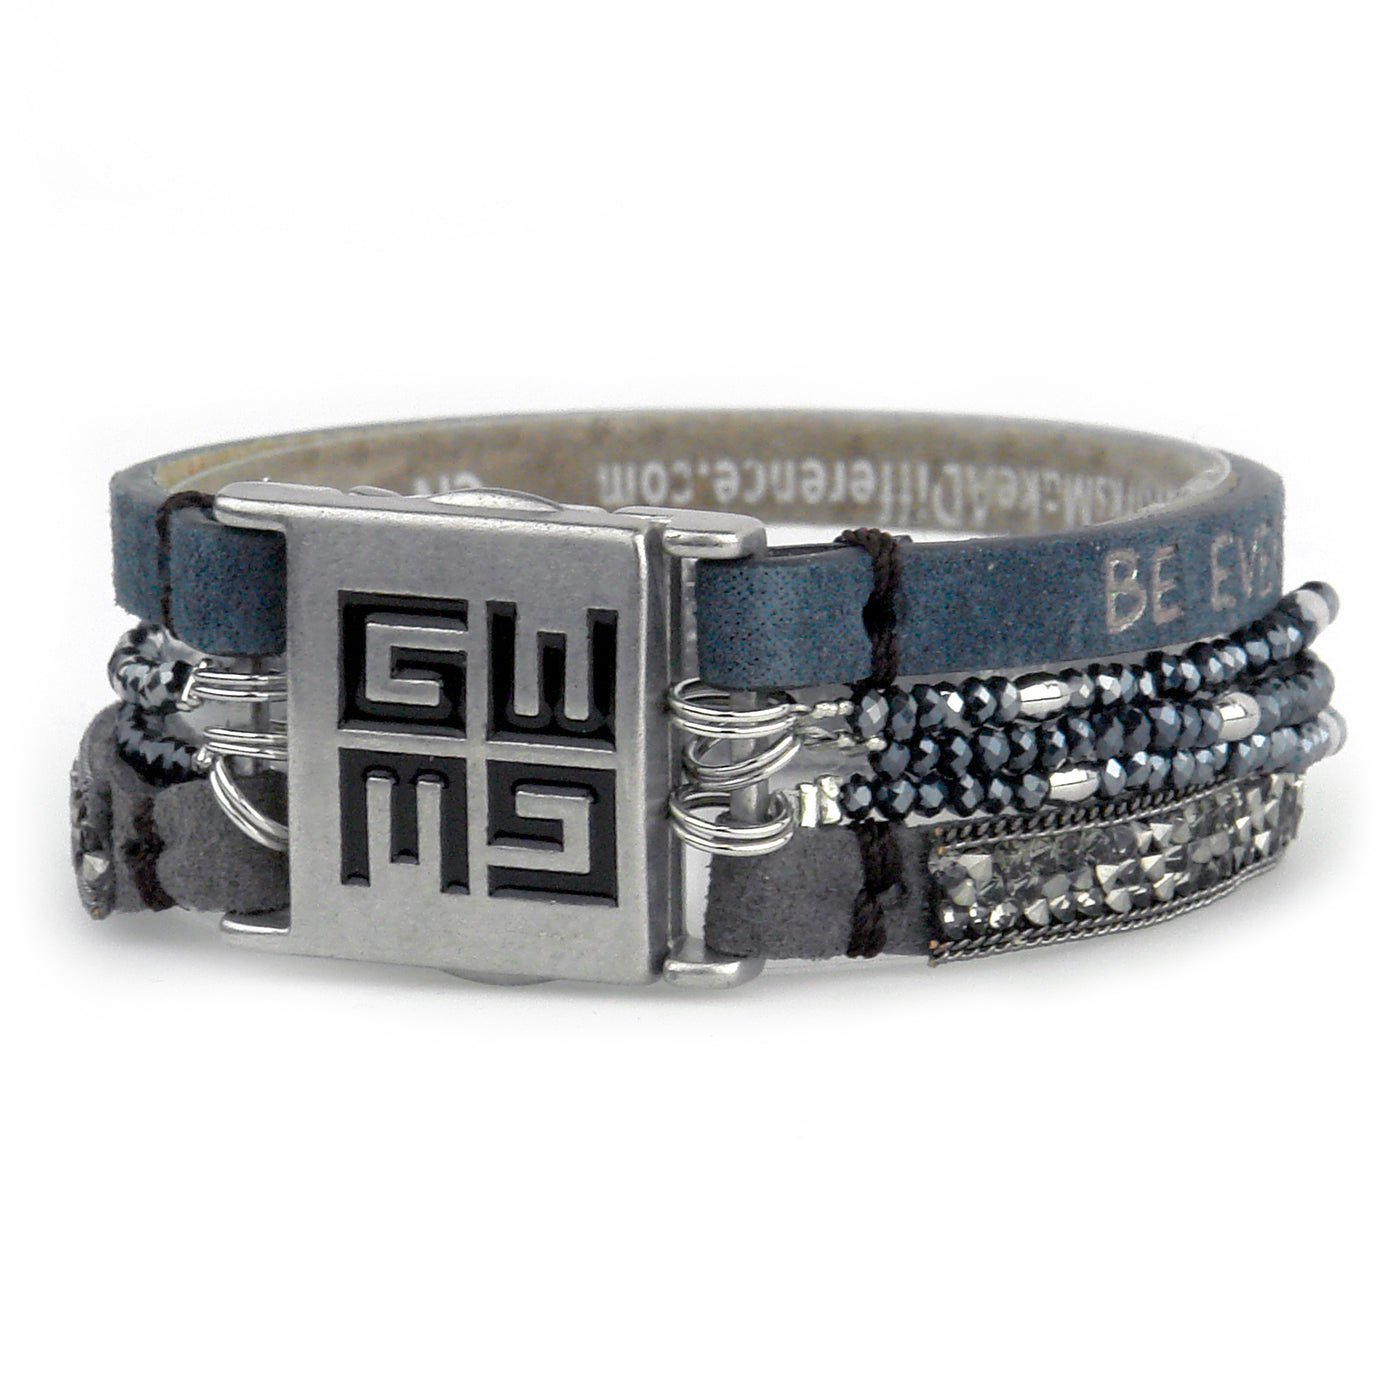 Elegant Cuff Bracelet-Good Work(s) Make A Difference® | Christian and Inspirational Jewelry Company in Vernon, California